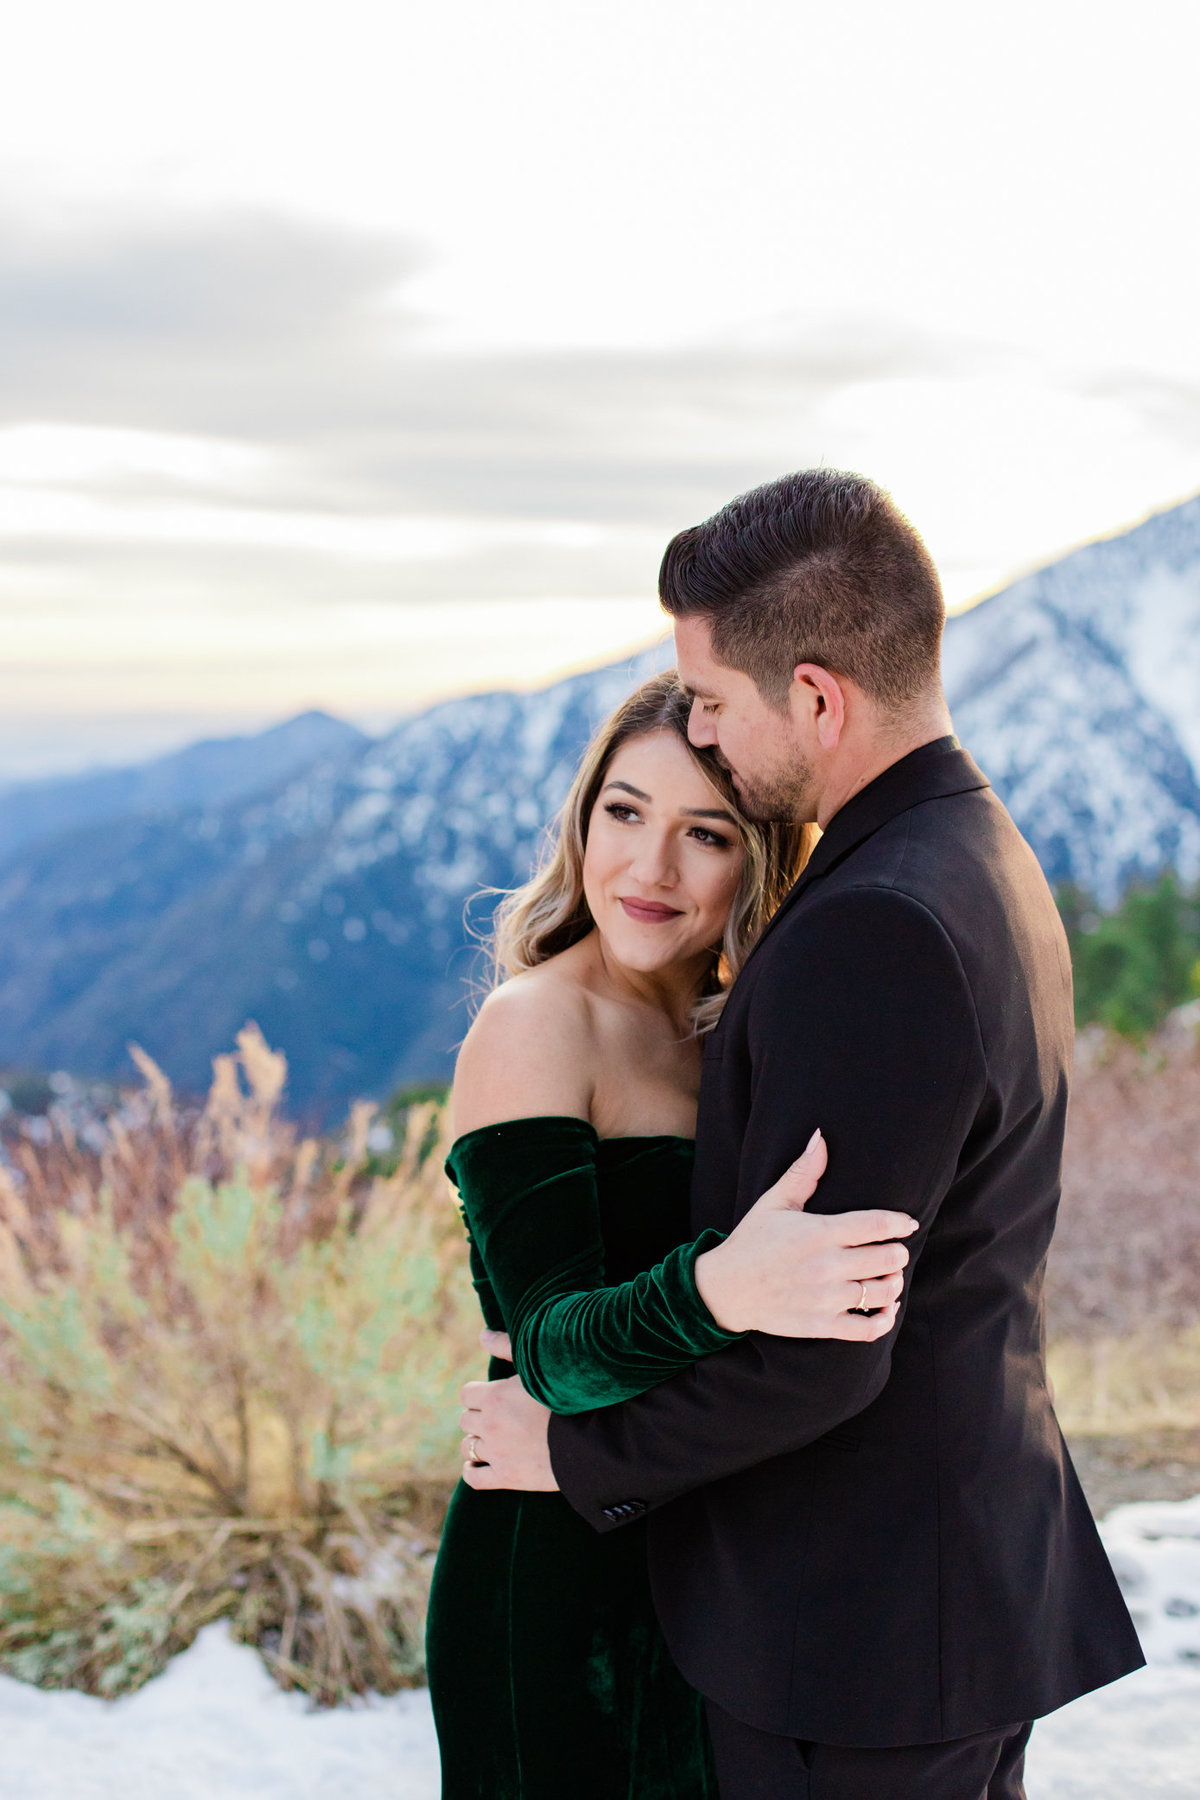 Wrightwood Shootout, Snow Engagement, Snow Elopement, Mountain Elopement, Yosemite Elopement, Wrightwood Elopement, Wrightwood Engagement, Mountainside Bride, Mountainside Elopement-41